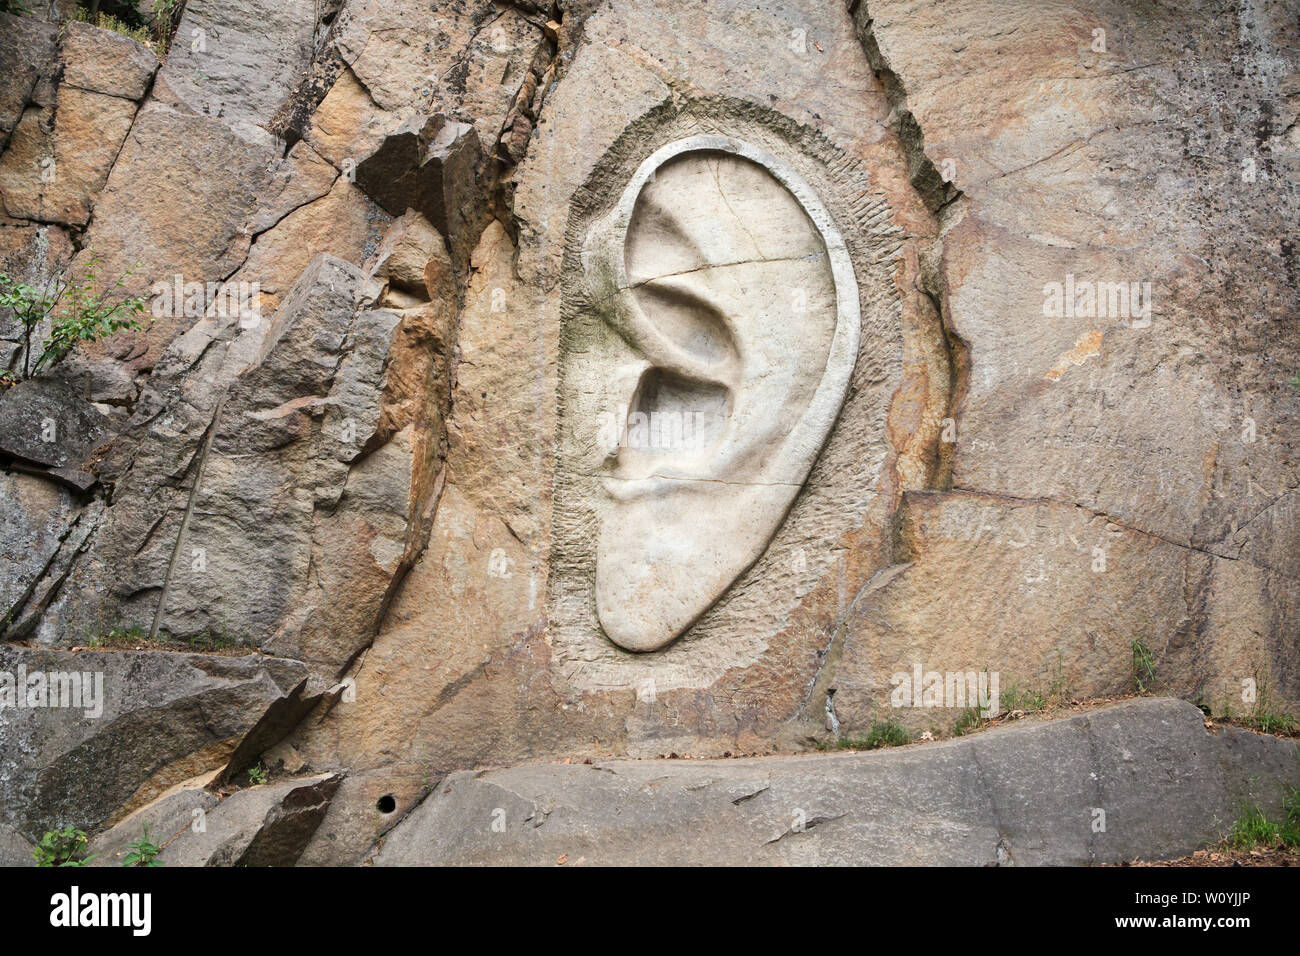 Monumental relief 'Bretschneider's Ear' (Bretschneiderovo ucho) carved by Czech sculptor Radomír Dvořák (2005) in the abandoned quarry near Lipnice nad Sázavou in Vysočina Region, Czech Republic. The relief is one of the three relieves forming the National Monument of Spying (Národní památník odposlechu) located in three nearby quarries. Police agent Bretschneider was one of the characters of the famous satirical novel The Good Soldier Švejk by Czech novelist Jaroslav Hašek, who spent last months of his life and died in Lipnice nad Sázavou. Stock Photo